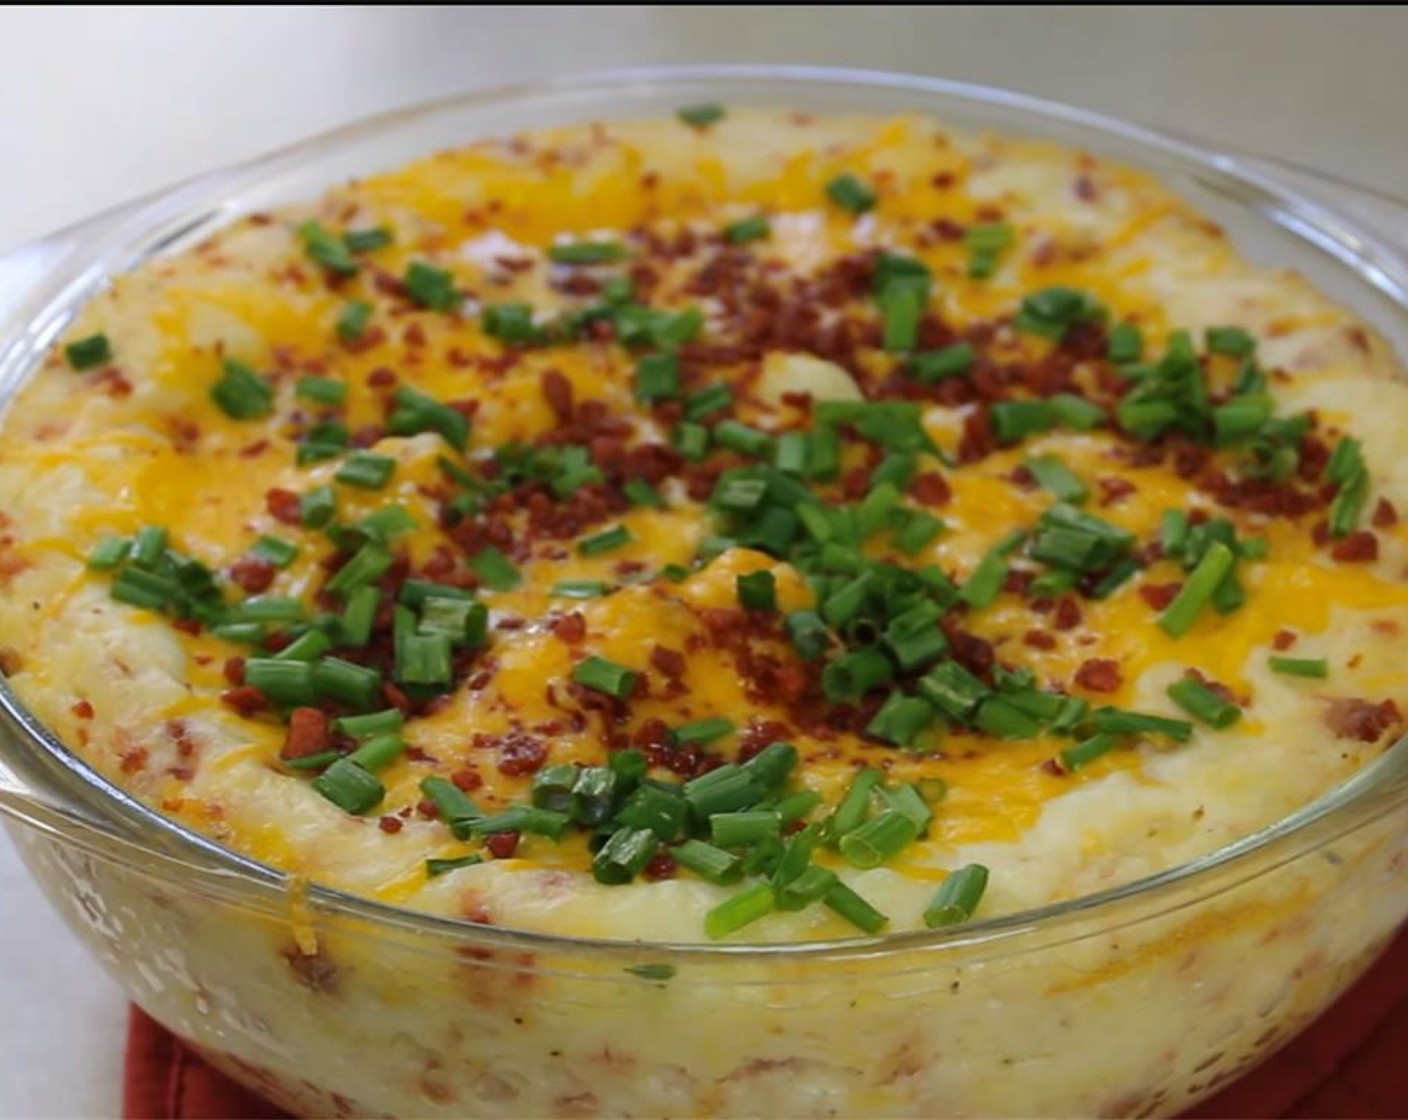 step 7 Top with remaining Cheddar Cheese (1/2 cup), Bacon (4 slices), and Scallion (1/2 bunch). Bake 5 more minutes to melt cheese. Serve and enjoy!